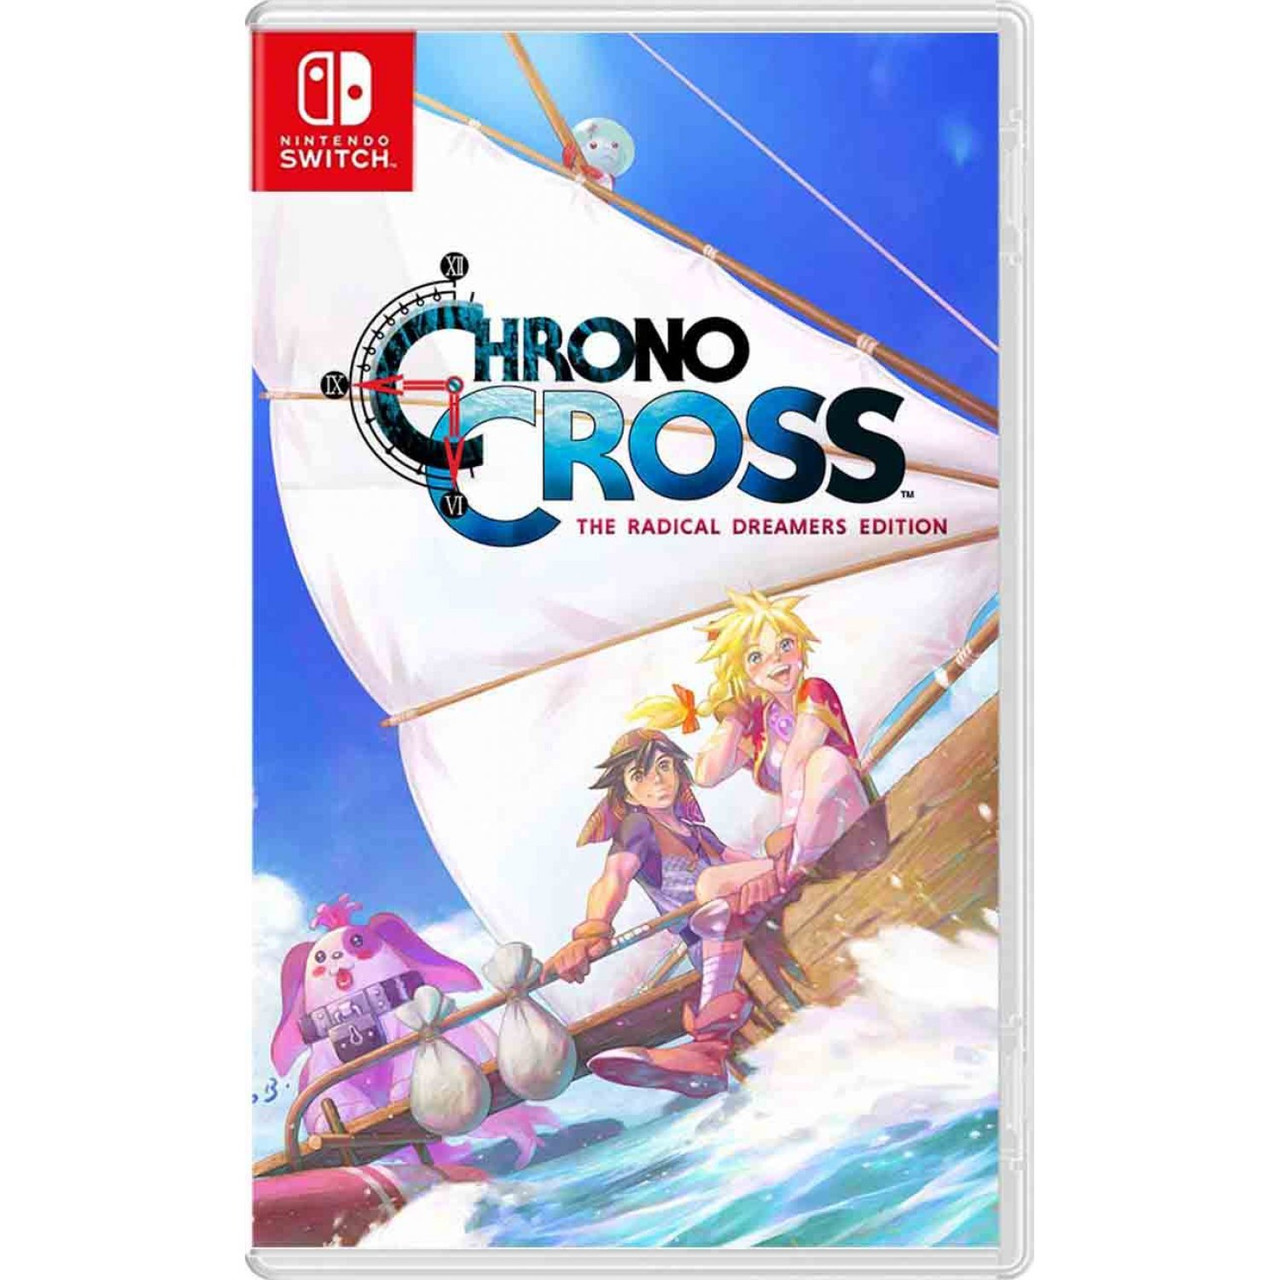 Chrono Cross: Radical Dreamers' remaster release date and trailer